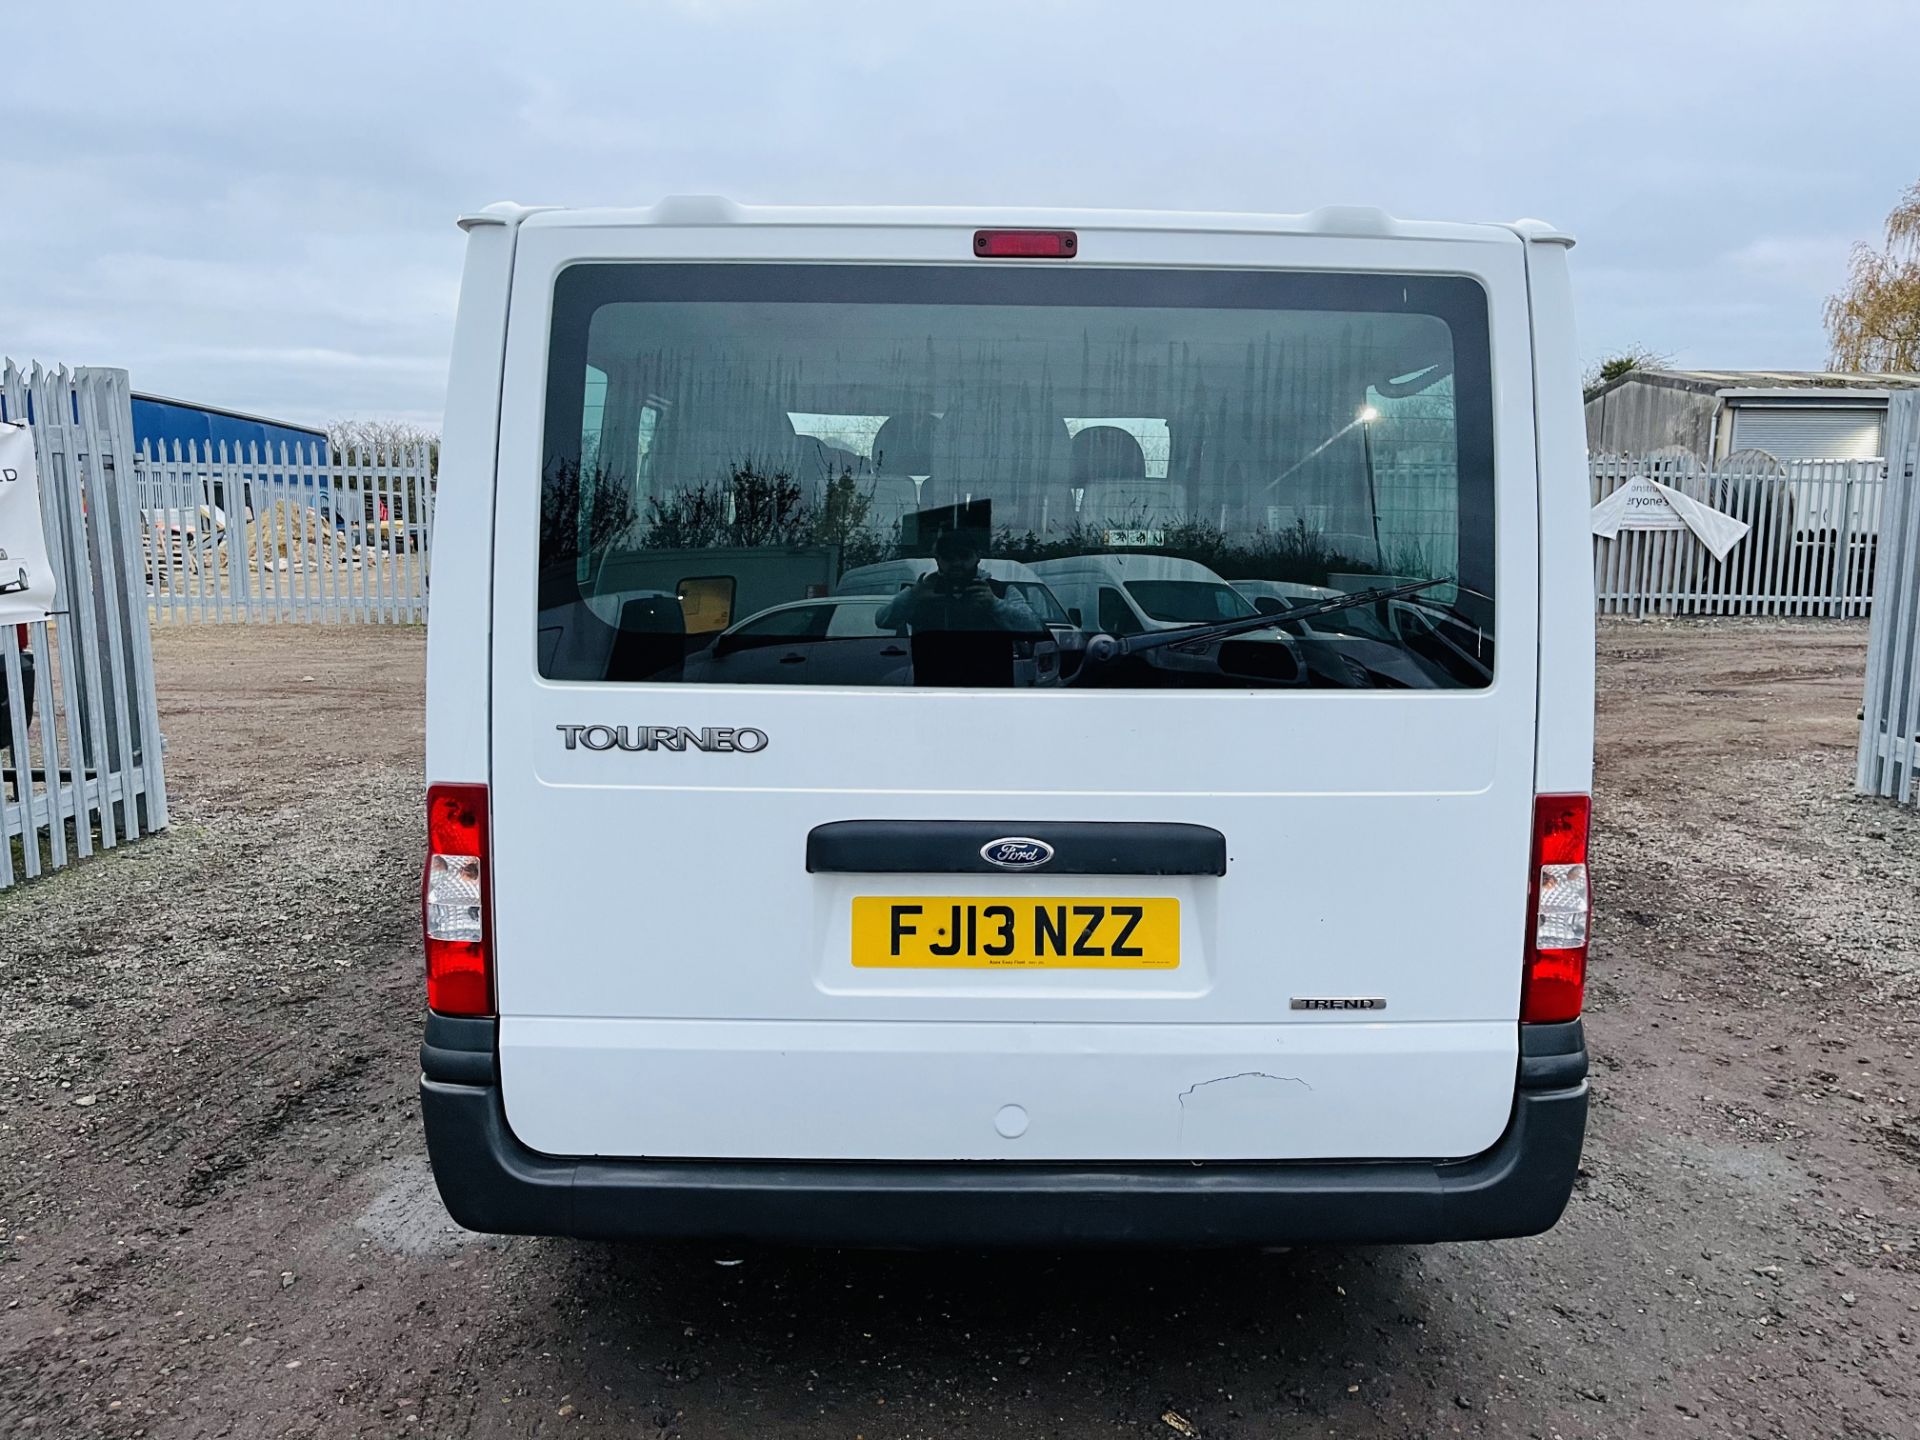 ** ON SALE ** Ford Transit Toureno 2.2 TDCI Trend 2013 '13 Reg' 9 seats - Air Con - Cruise Control - Image 13 of 25